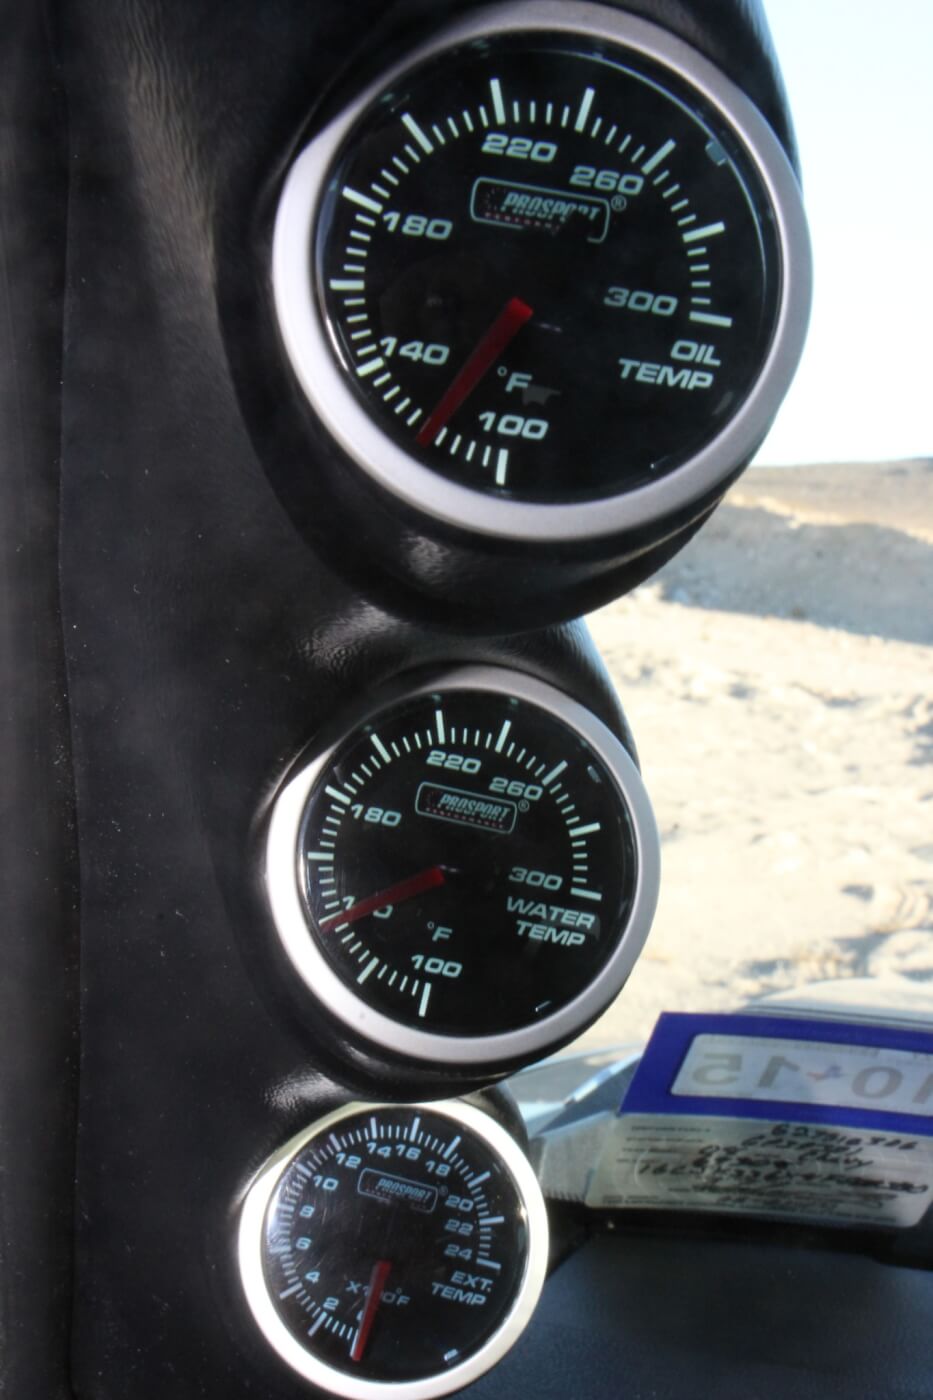 When you’re running more power than the factory intended, you need to keep an eye on things. To better monitor the engine, an A-pillar mount houses Pro-Sport oil temp, water temp and EGT gauges.